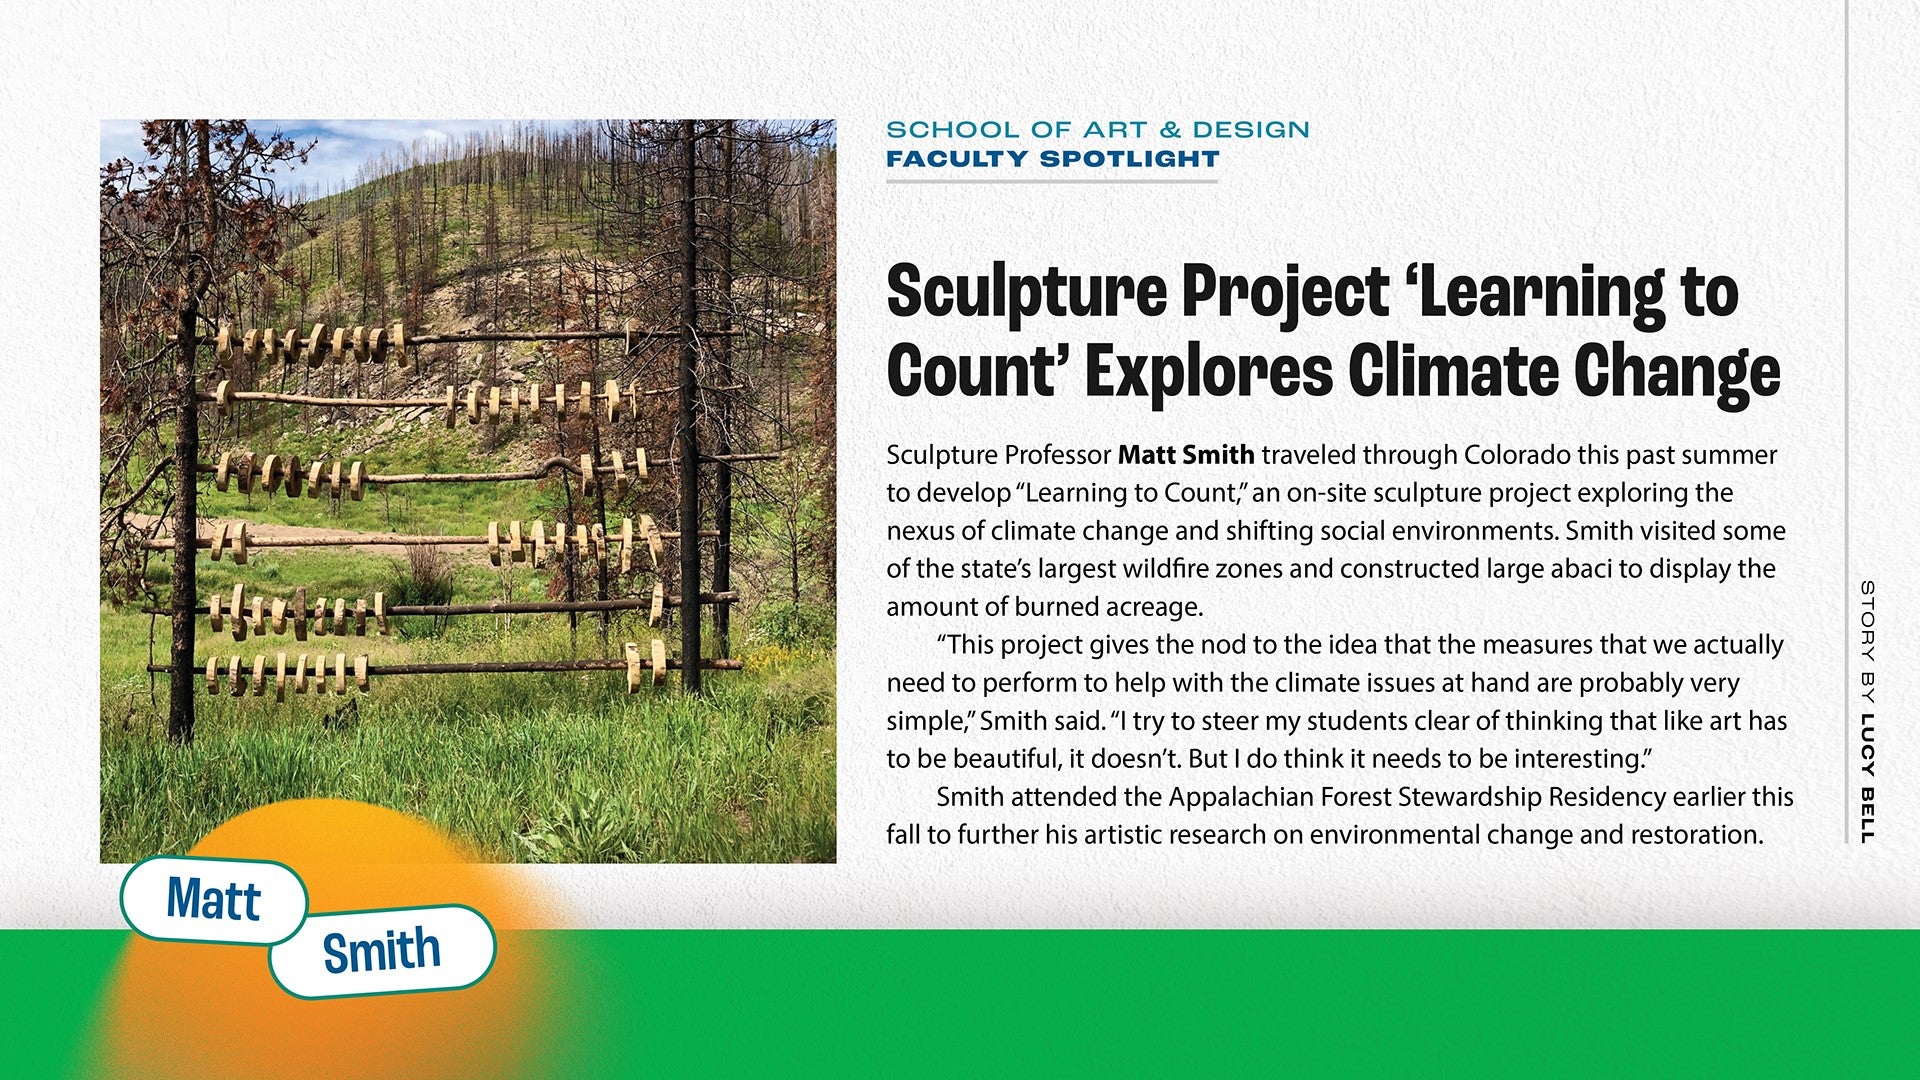 https://www.marshall.edu/art/files/Smith-Sculpture-Project-Learning-to-Count-Explores-Climate-Change.jpg